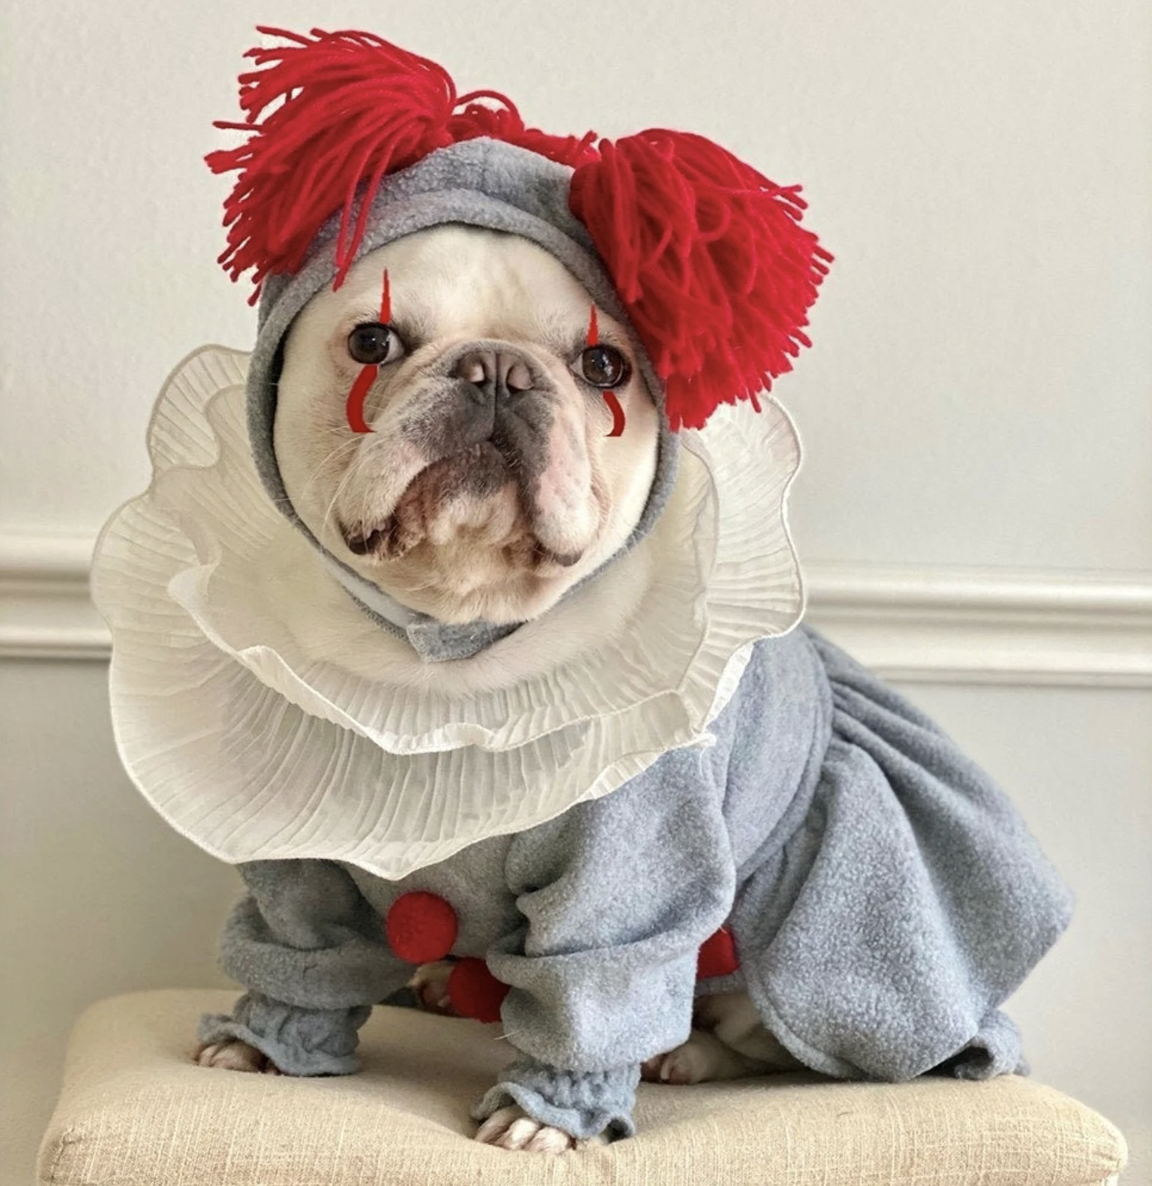 American bulldog in a clown Pennywise costume with white neck ruff and red yarn wig